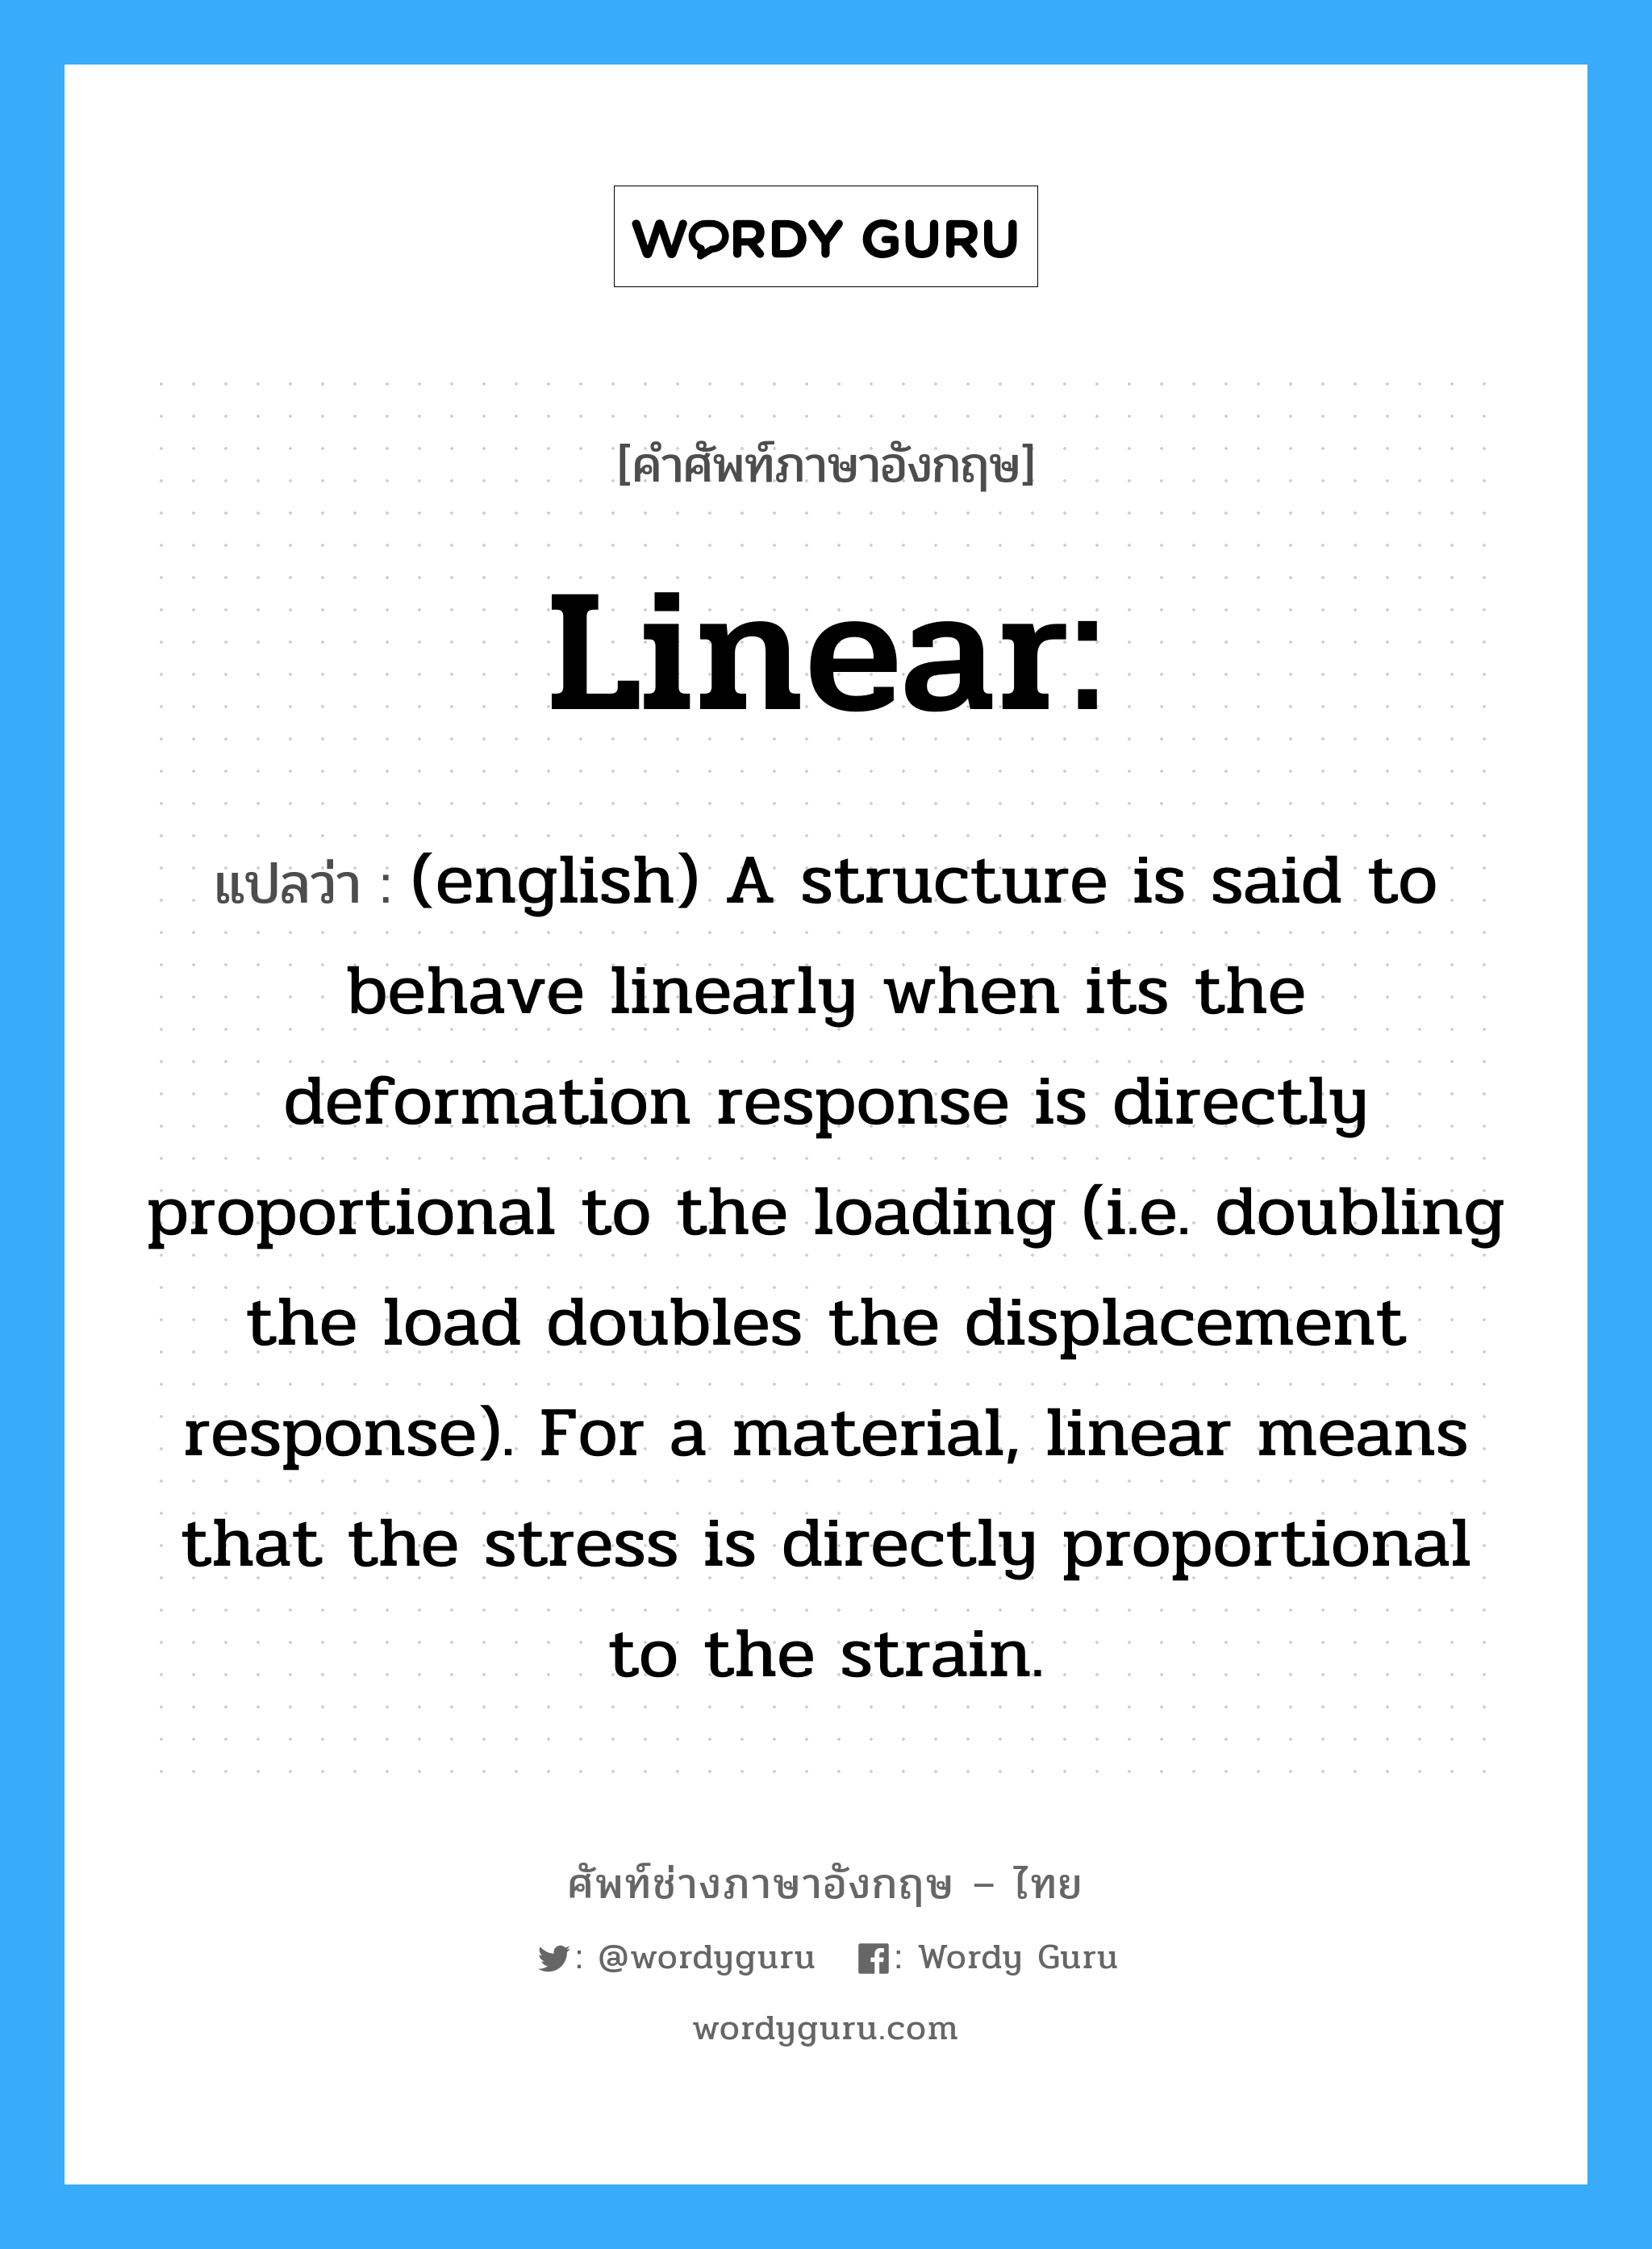 Linear: แปลว่า?, คำศัพท์ช่างภาษาอังกฤษ - ไทย Linear: คำศัพท์ภาษาอังกฤษ Linear: แปลว่า (english) A structure is said to behave linearly when its the deformation response is directly proportional to the loading (i.e. doubling the load doubles the displacement response). For a material, linear means that the stress is directly proportional to the strain.